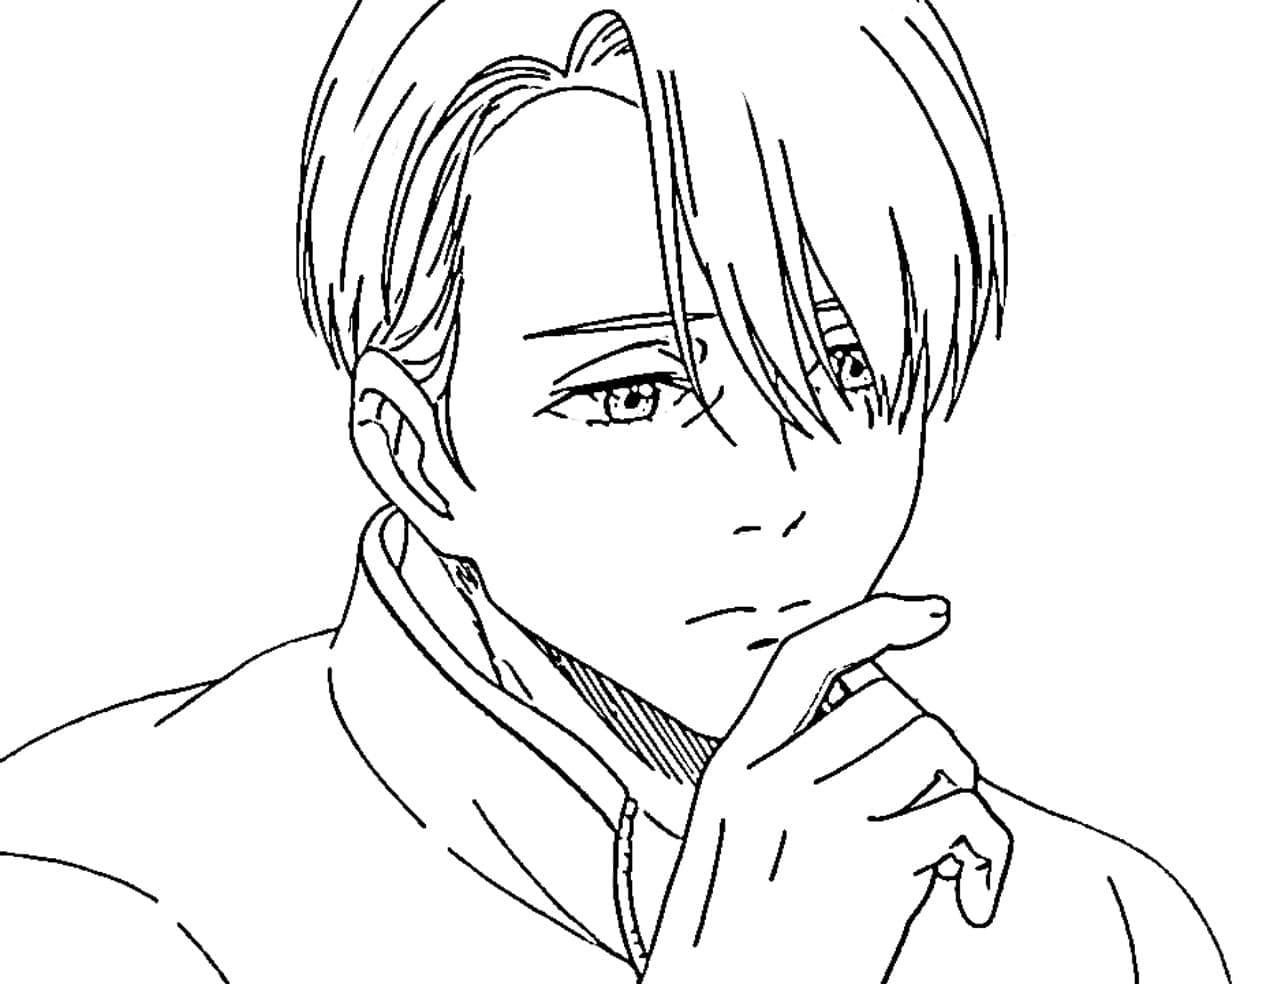 Victor from Yuri on Ice